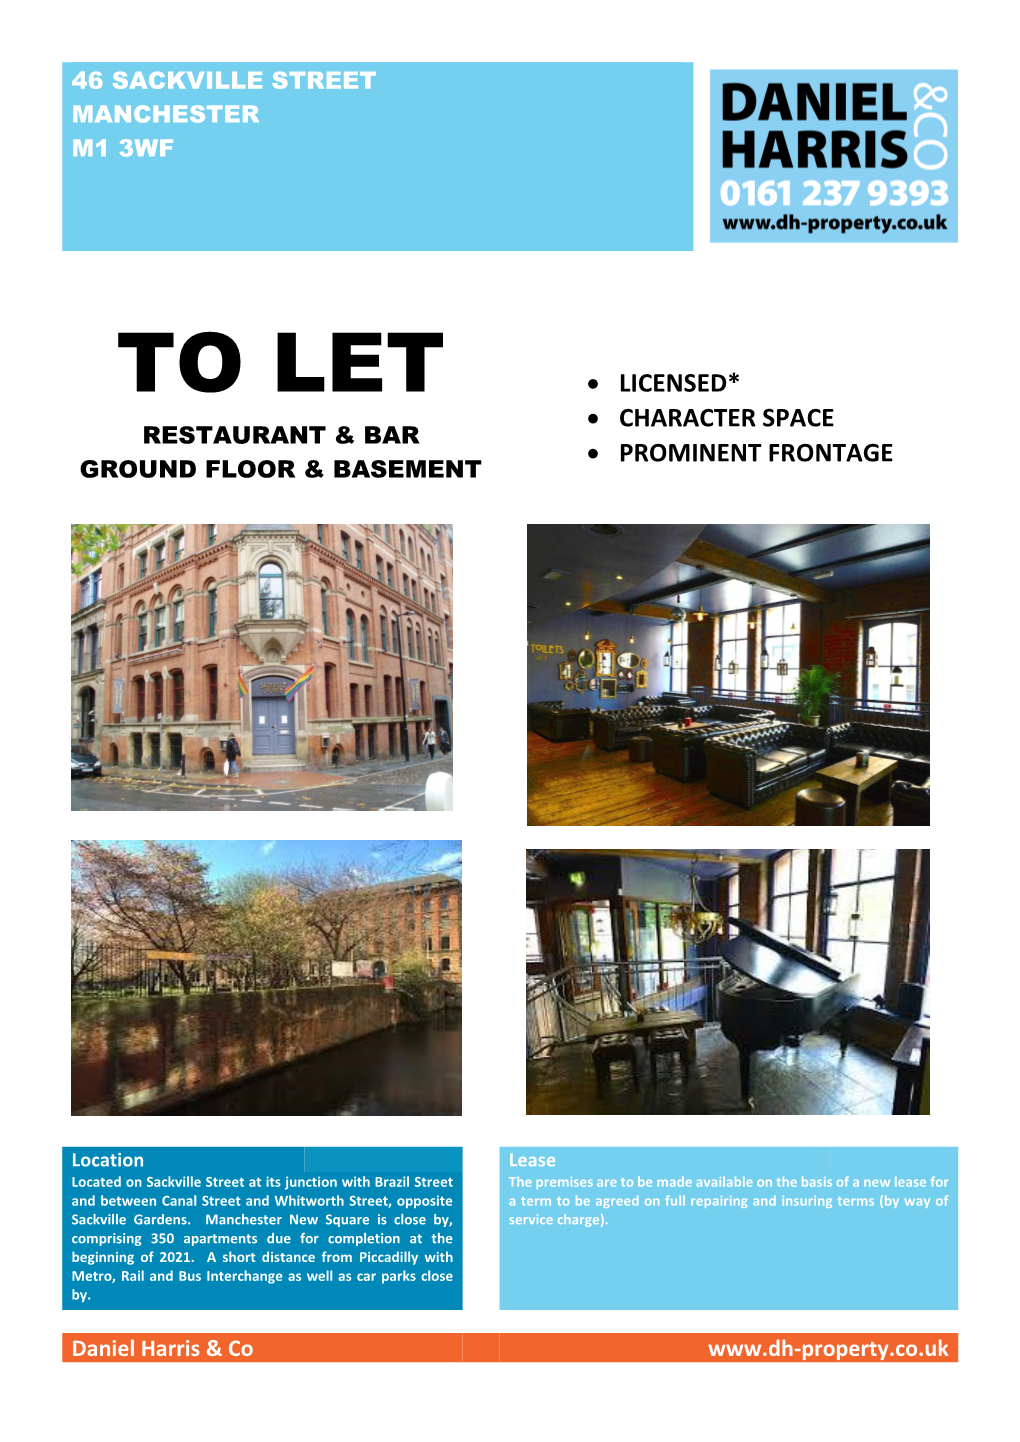 To Let • Licensed* • Character Space Restaurant & Bar • Prominent Frontage Ground Floor & Basement